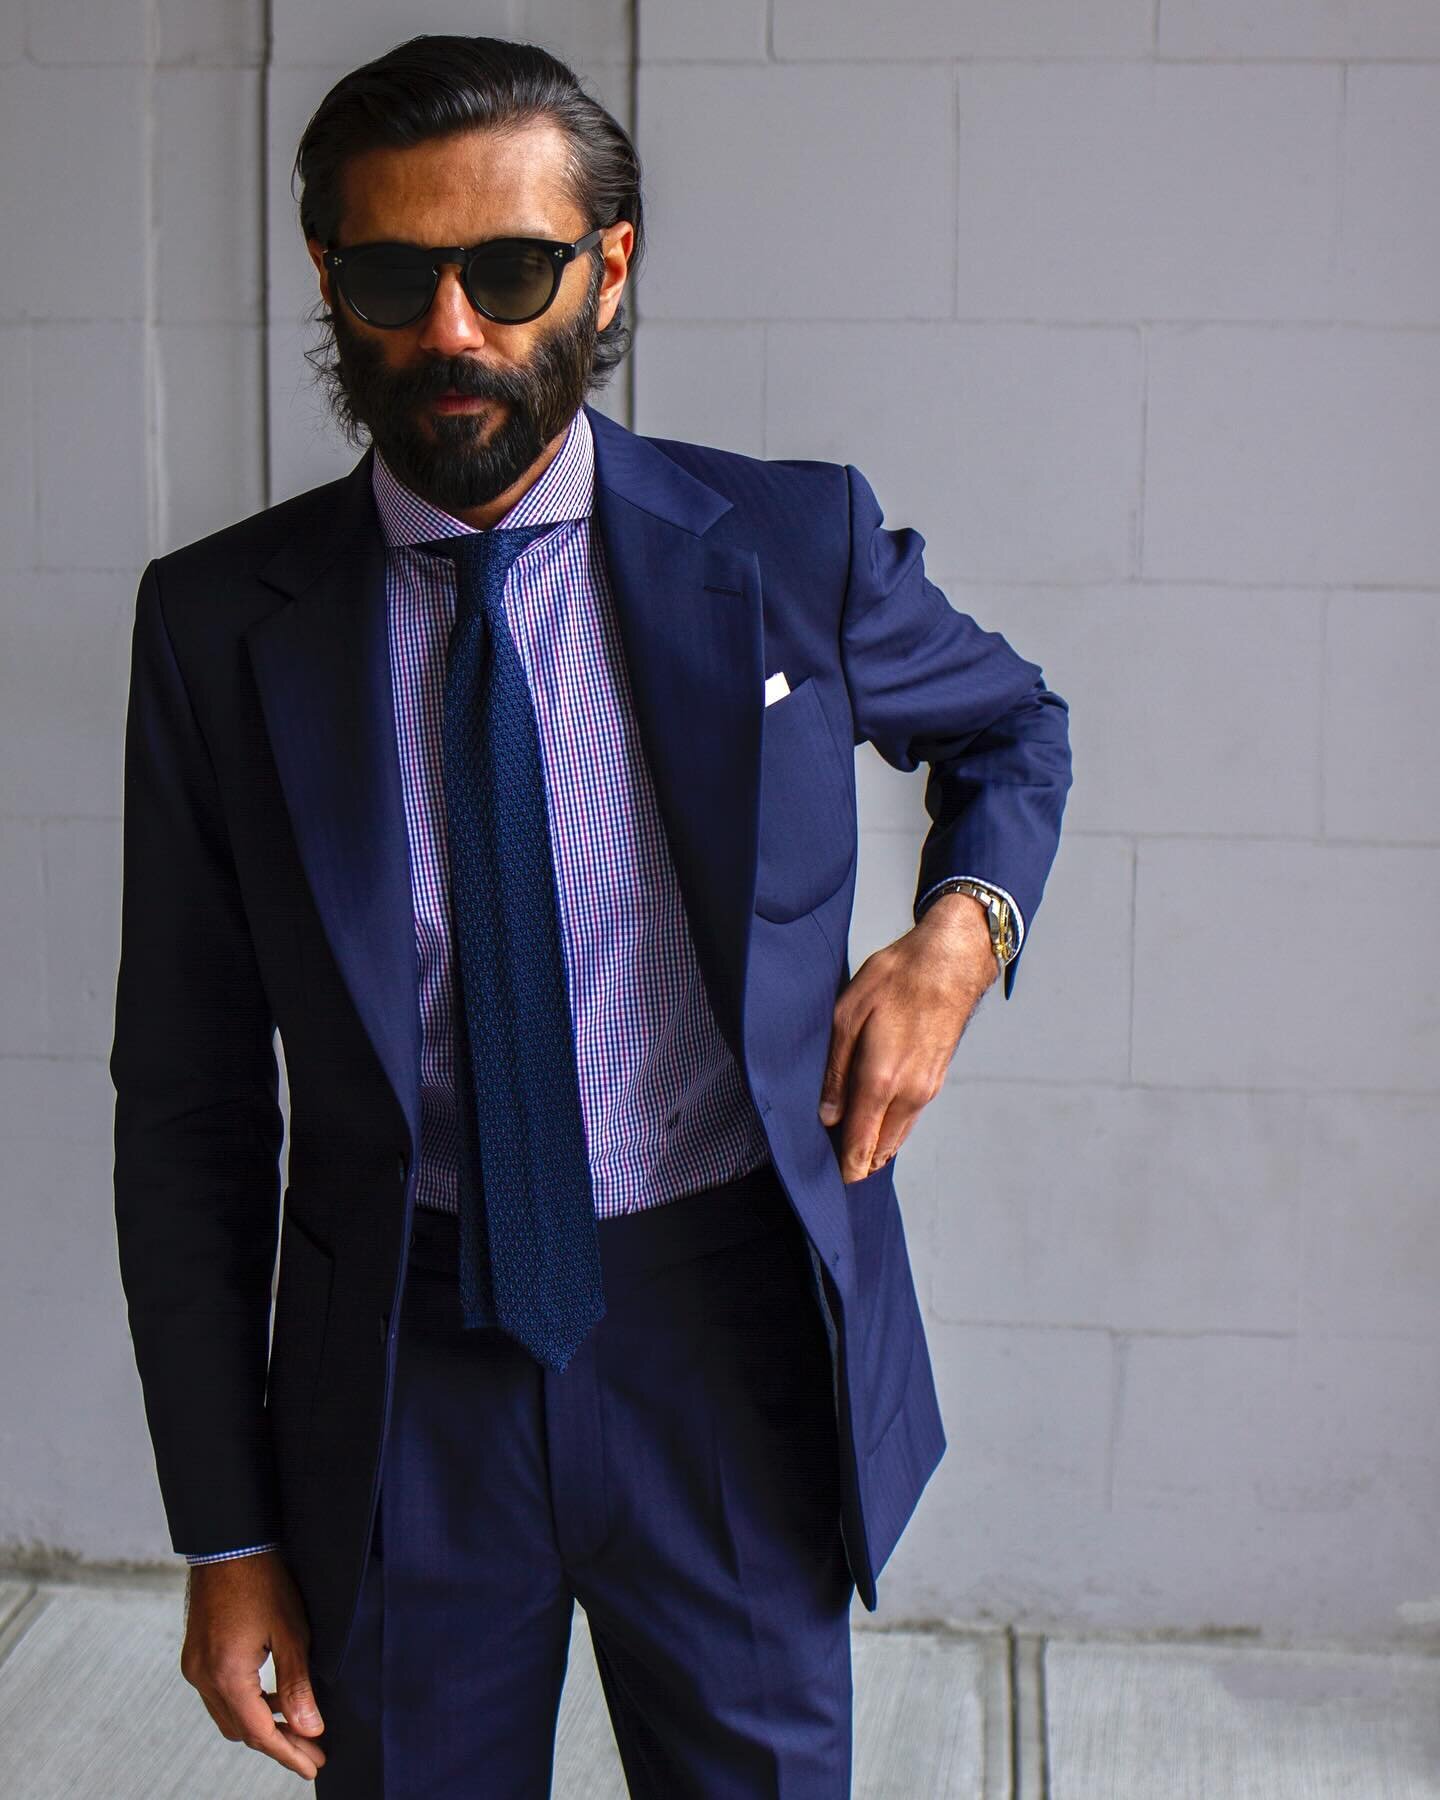 Herringbone (pictured in Mid Blue) is most definitely one of the easiest patterns and colors men can wear. It&rsquo;s one subtle step above your navy suit, and the sportcoat alone can be worn with a classic button-down and a tie.

50% OFF on Luxuriou